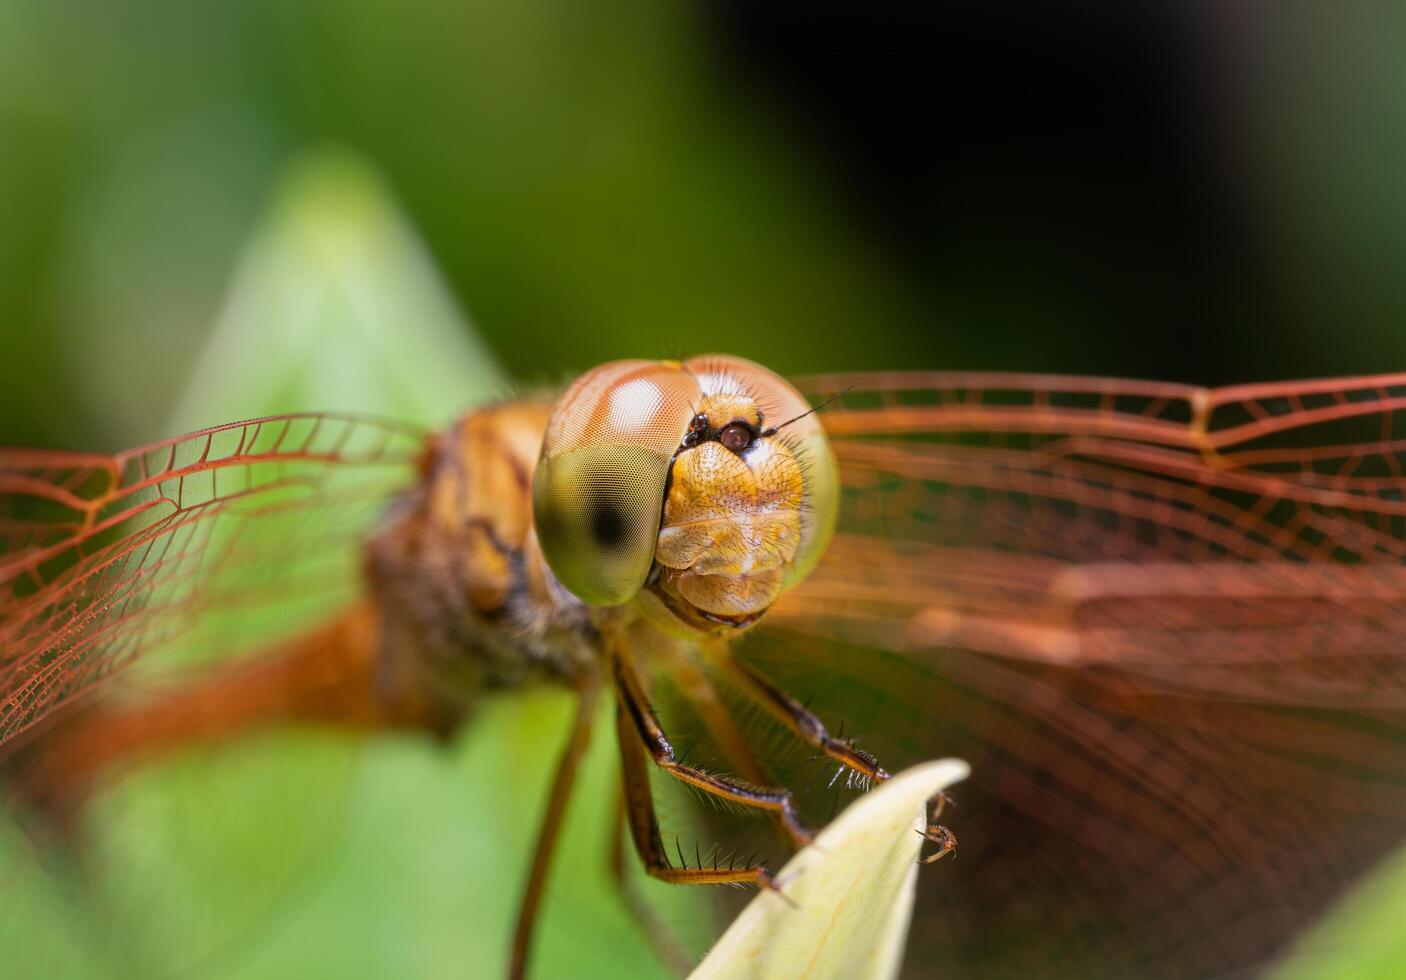 Close-up or macro photo of a dragonfly. Insect photo. Insect life in nature perched on a leaf. Dragonfly species. grid patterned eyes